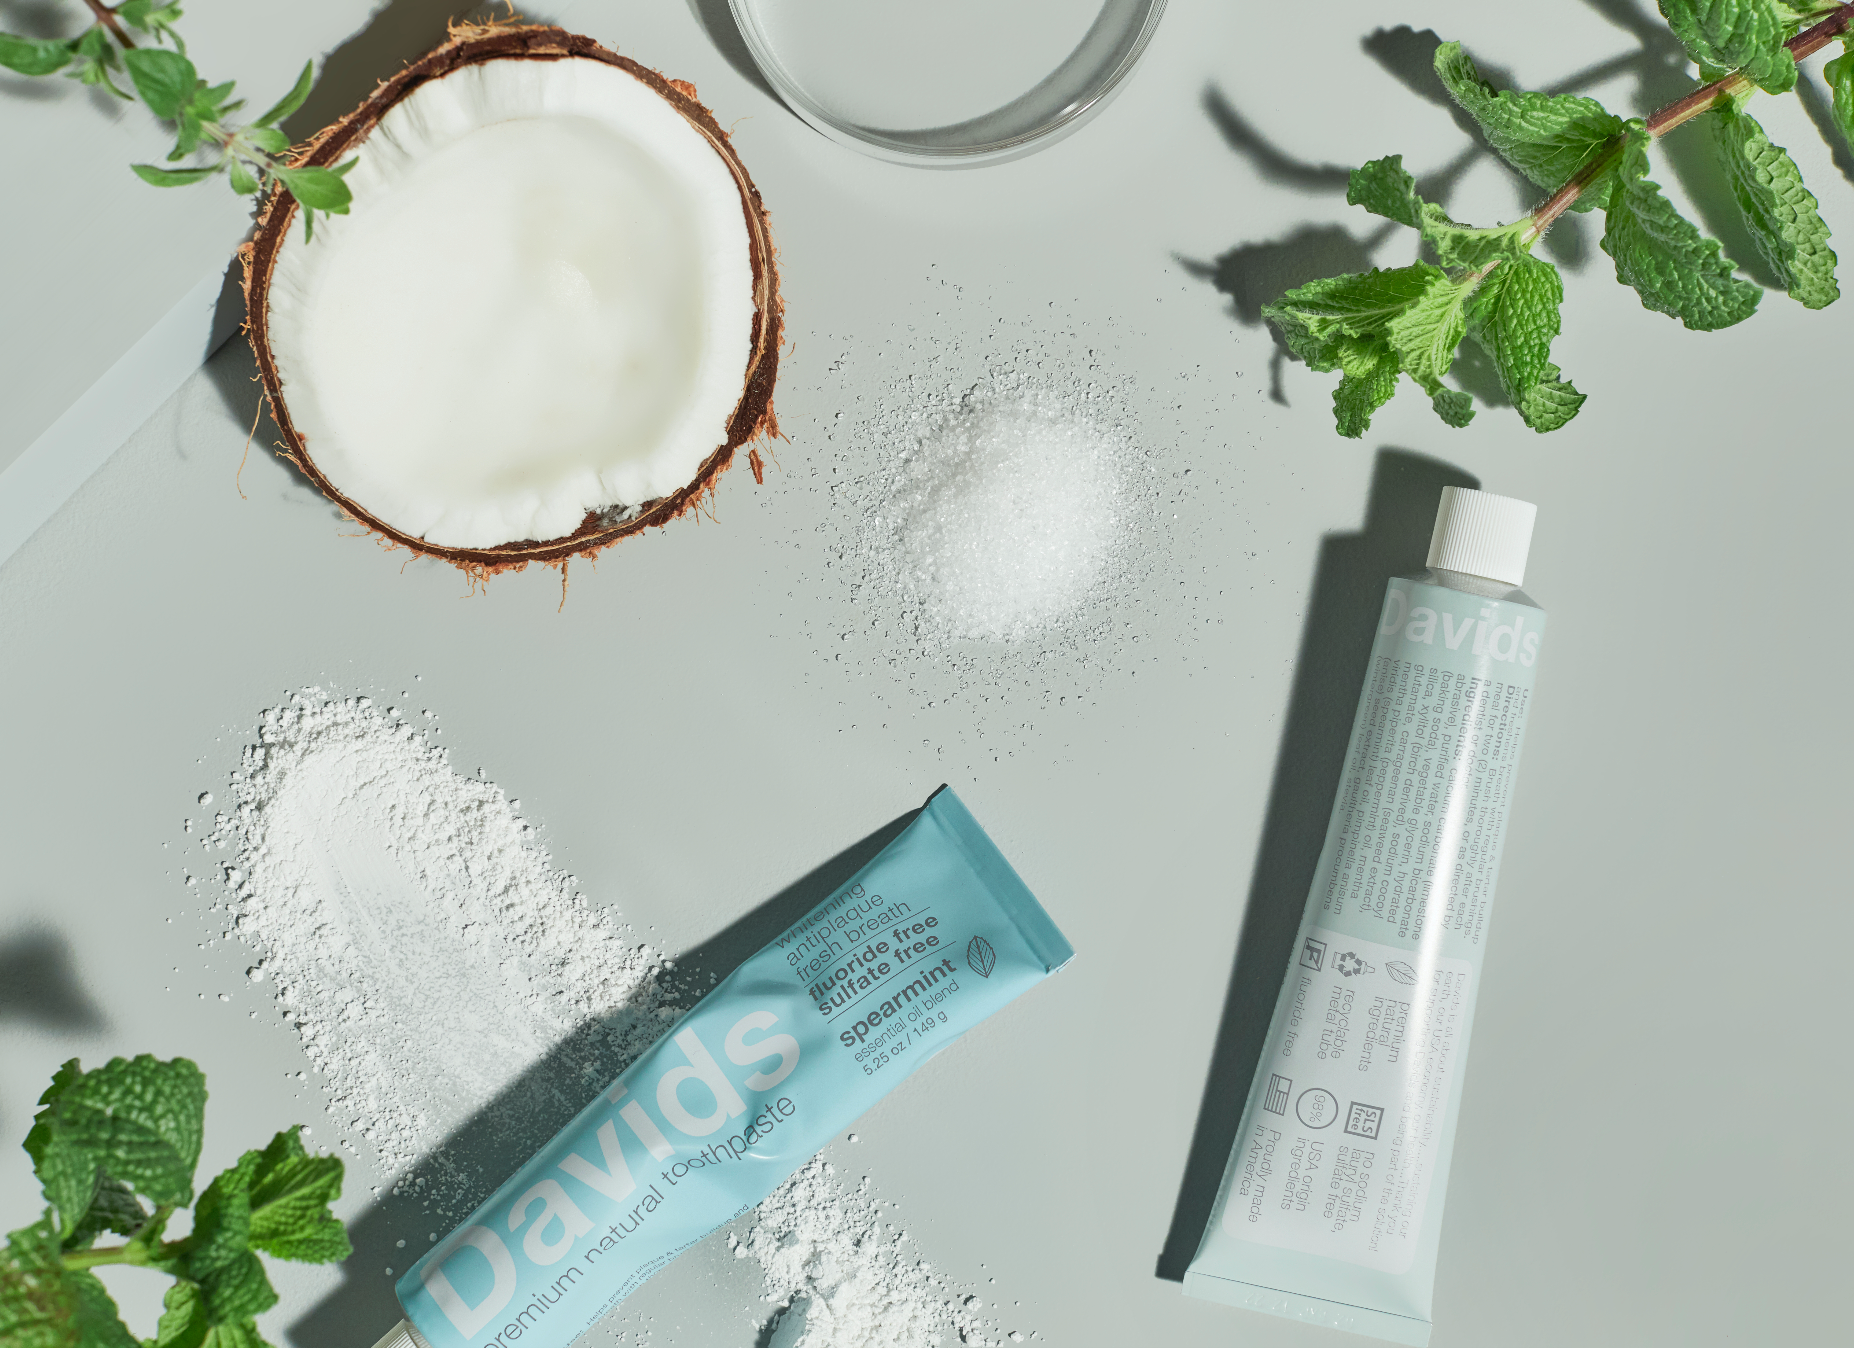 does your toothpaste use quality, sustainably sourced ingredients?